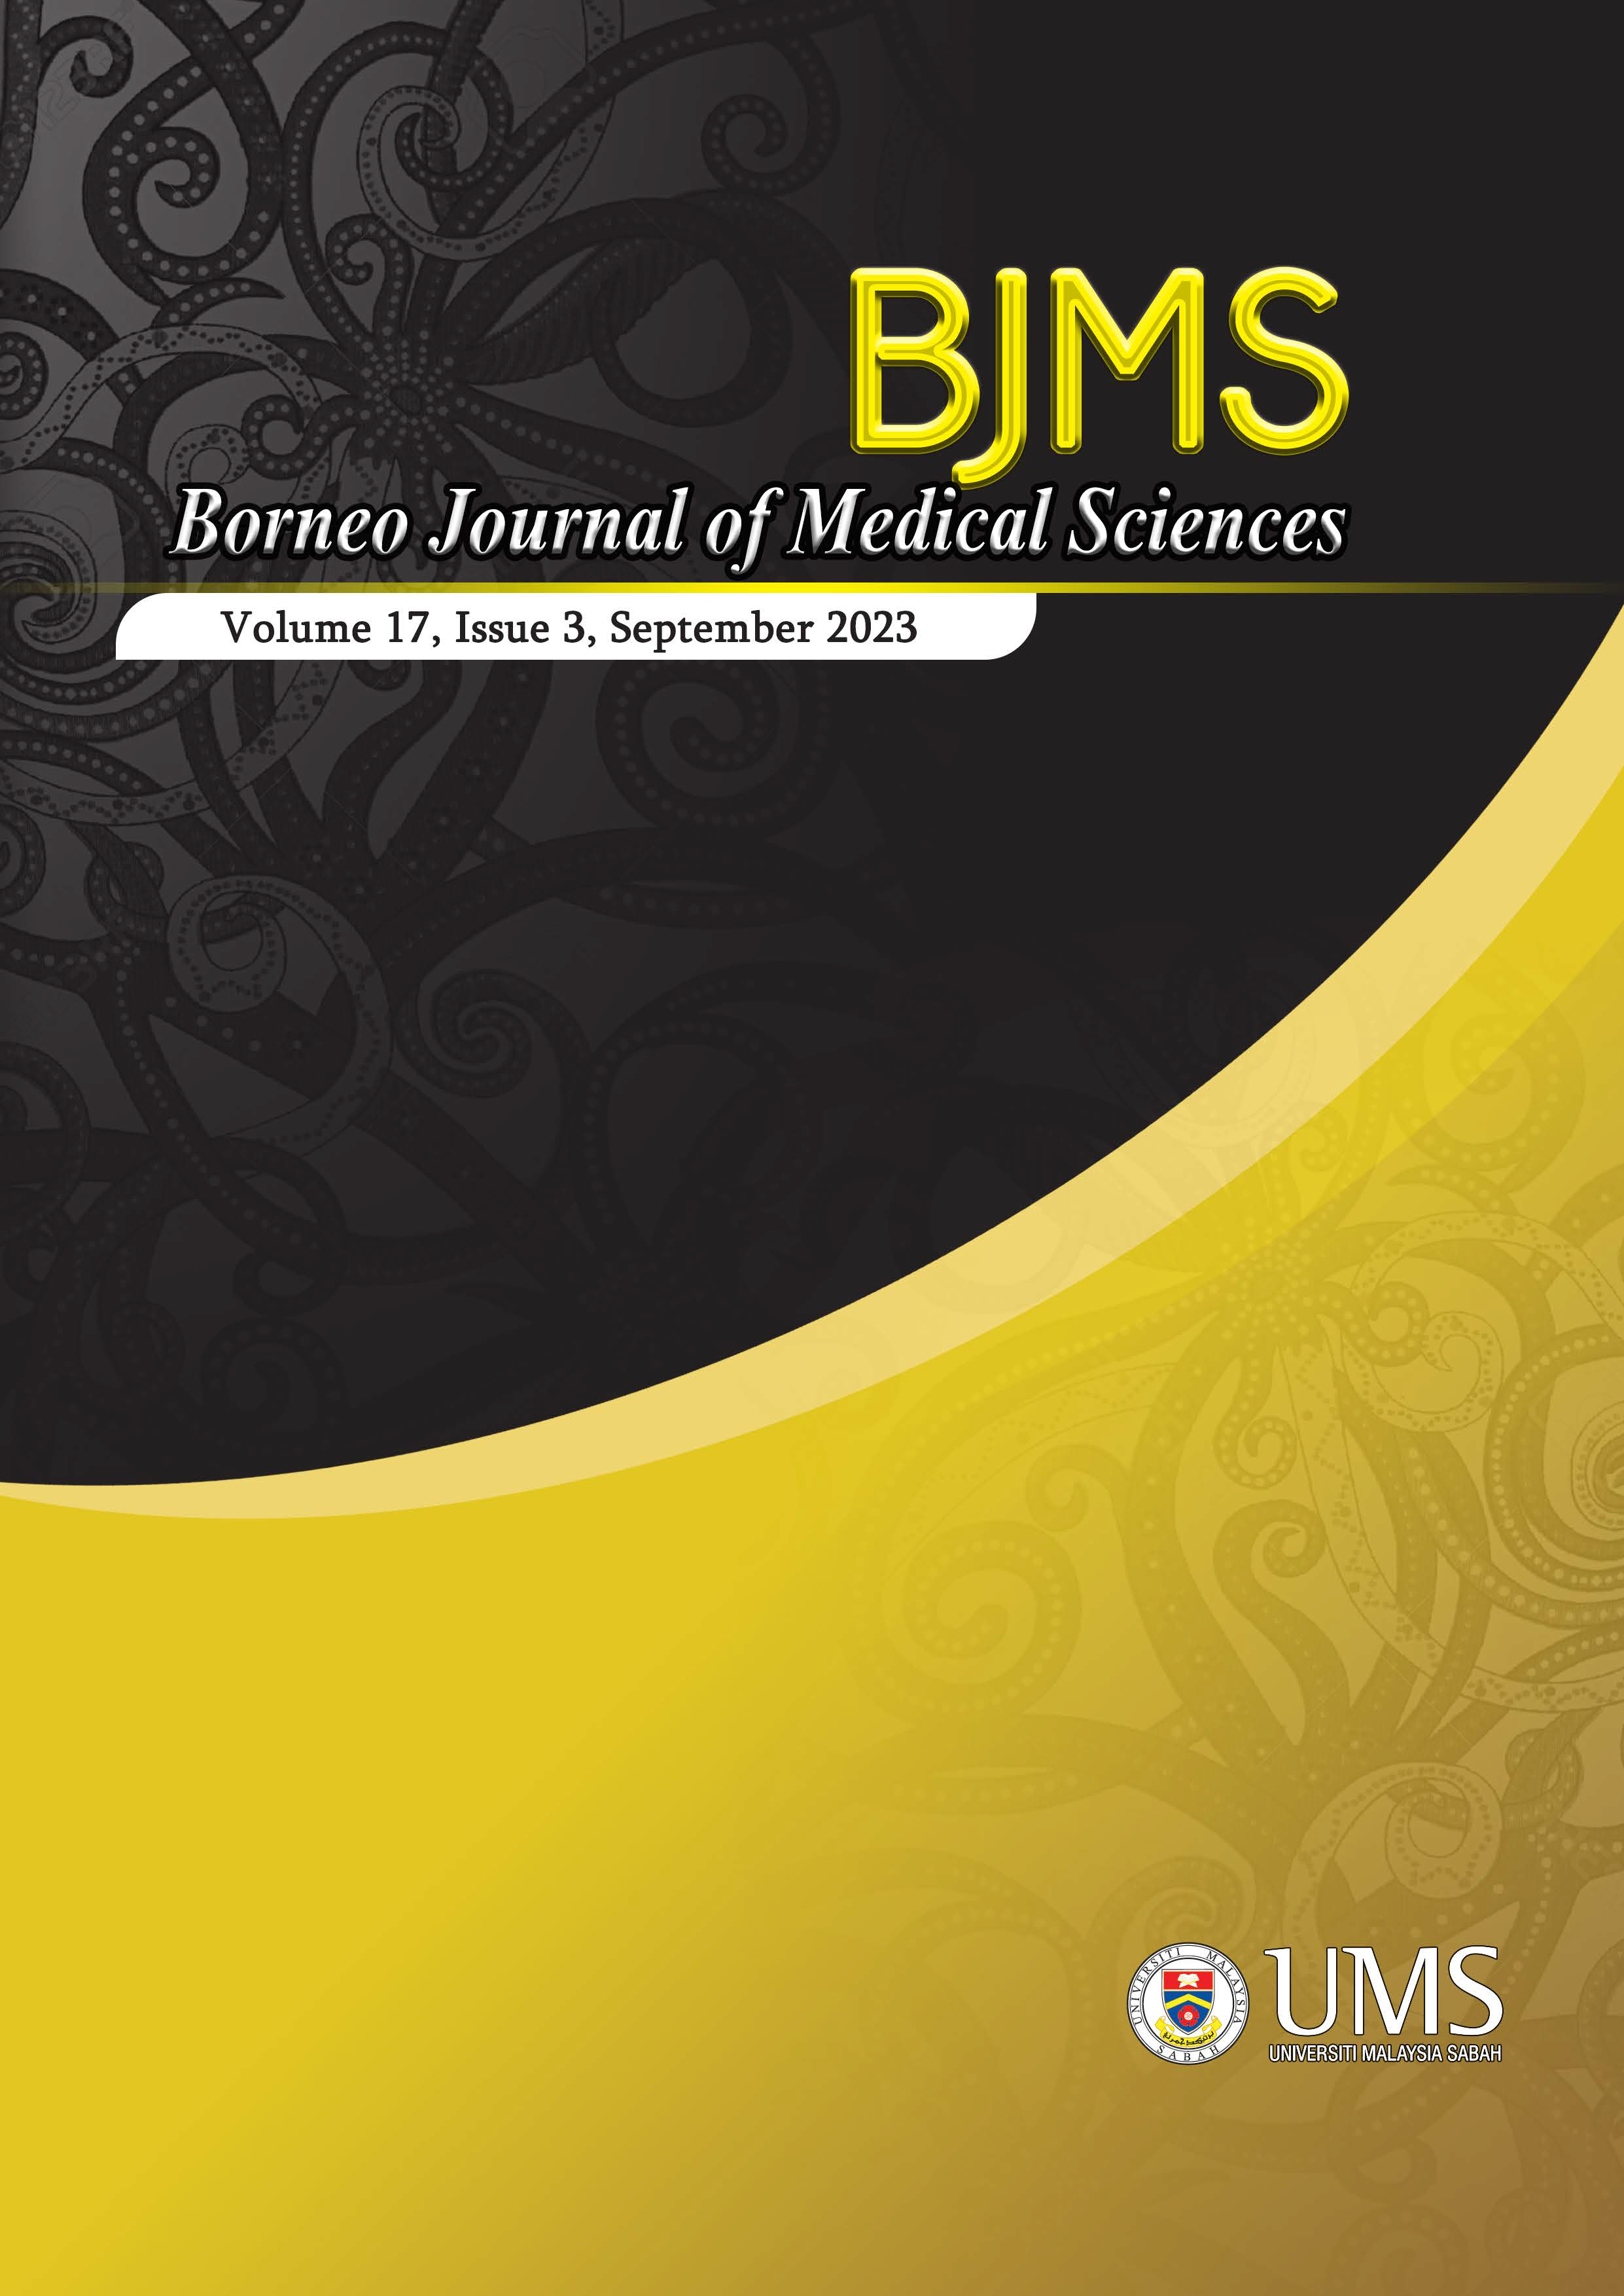 					View Vol. 17 No. 3 (2023): BORNEO JOURNAL OF MEDICAL SCIENCES VOLUME 17, ISSUE 3, SEPTEMBER 2023
				